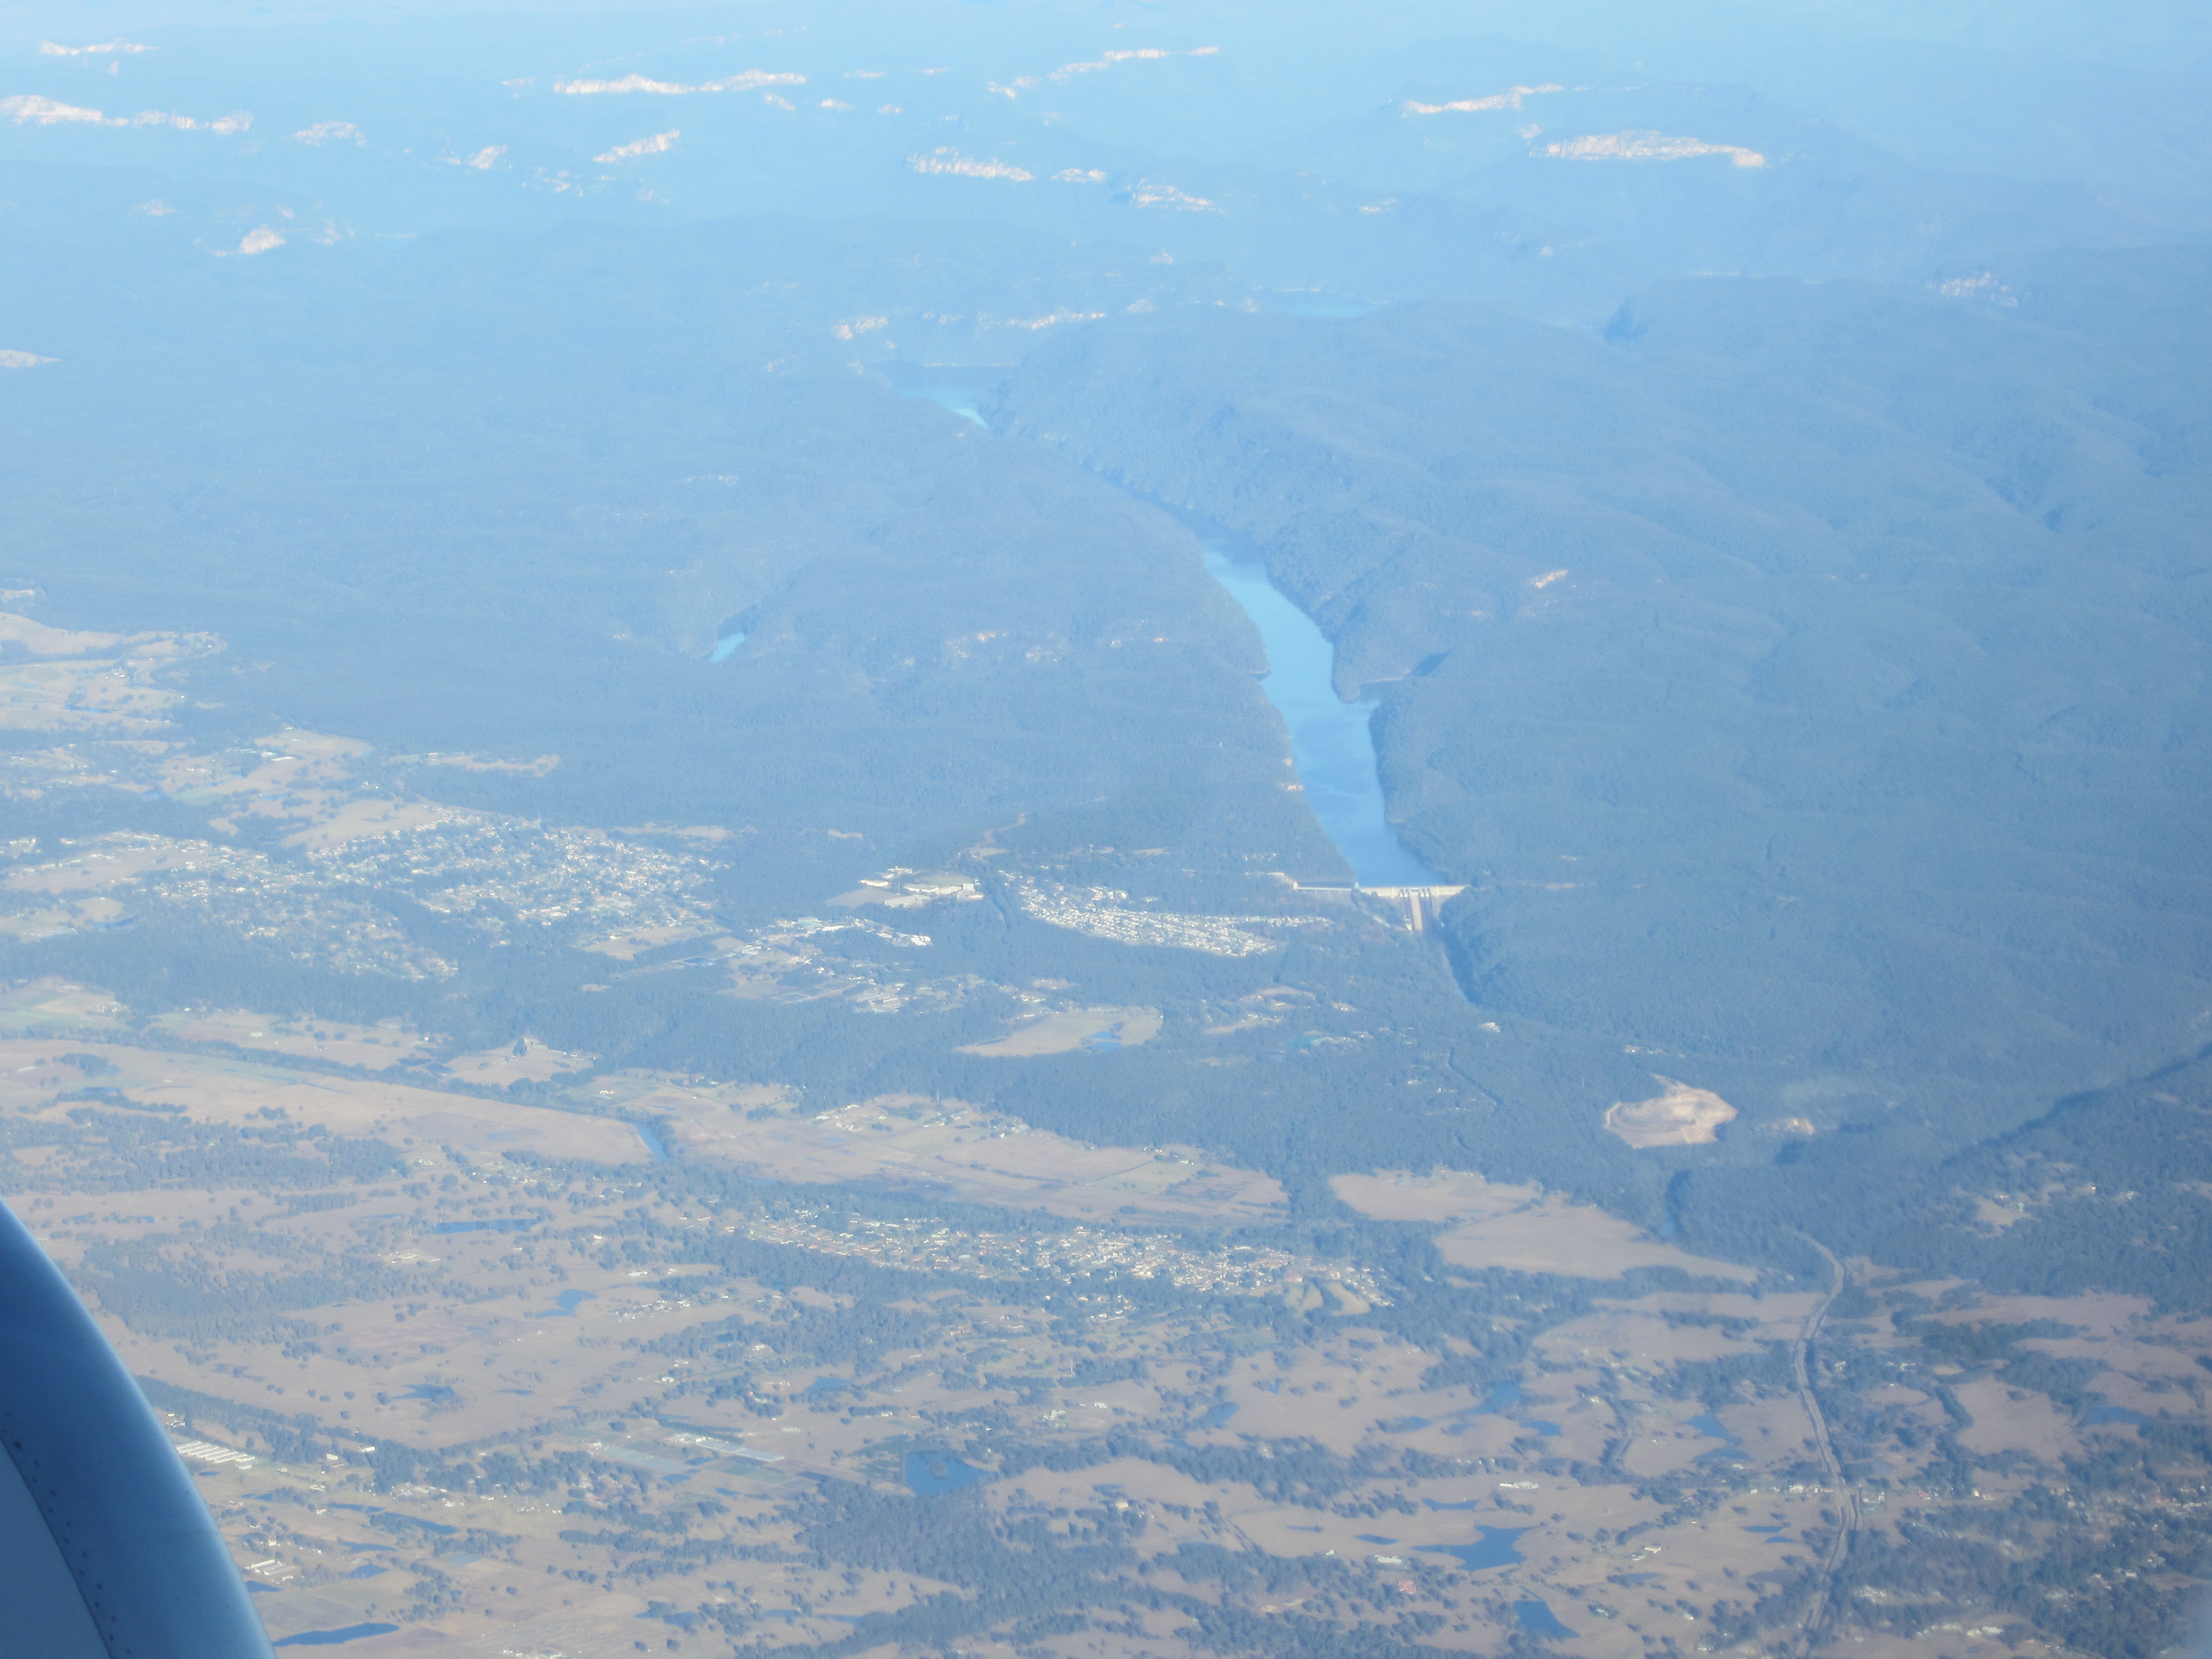 An aerial photograph taken from a plane of  a river and dam. There are two towns below the dam which can be seen in the image